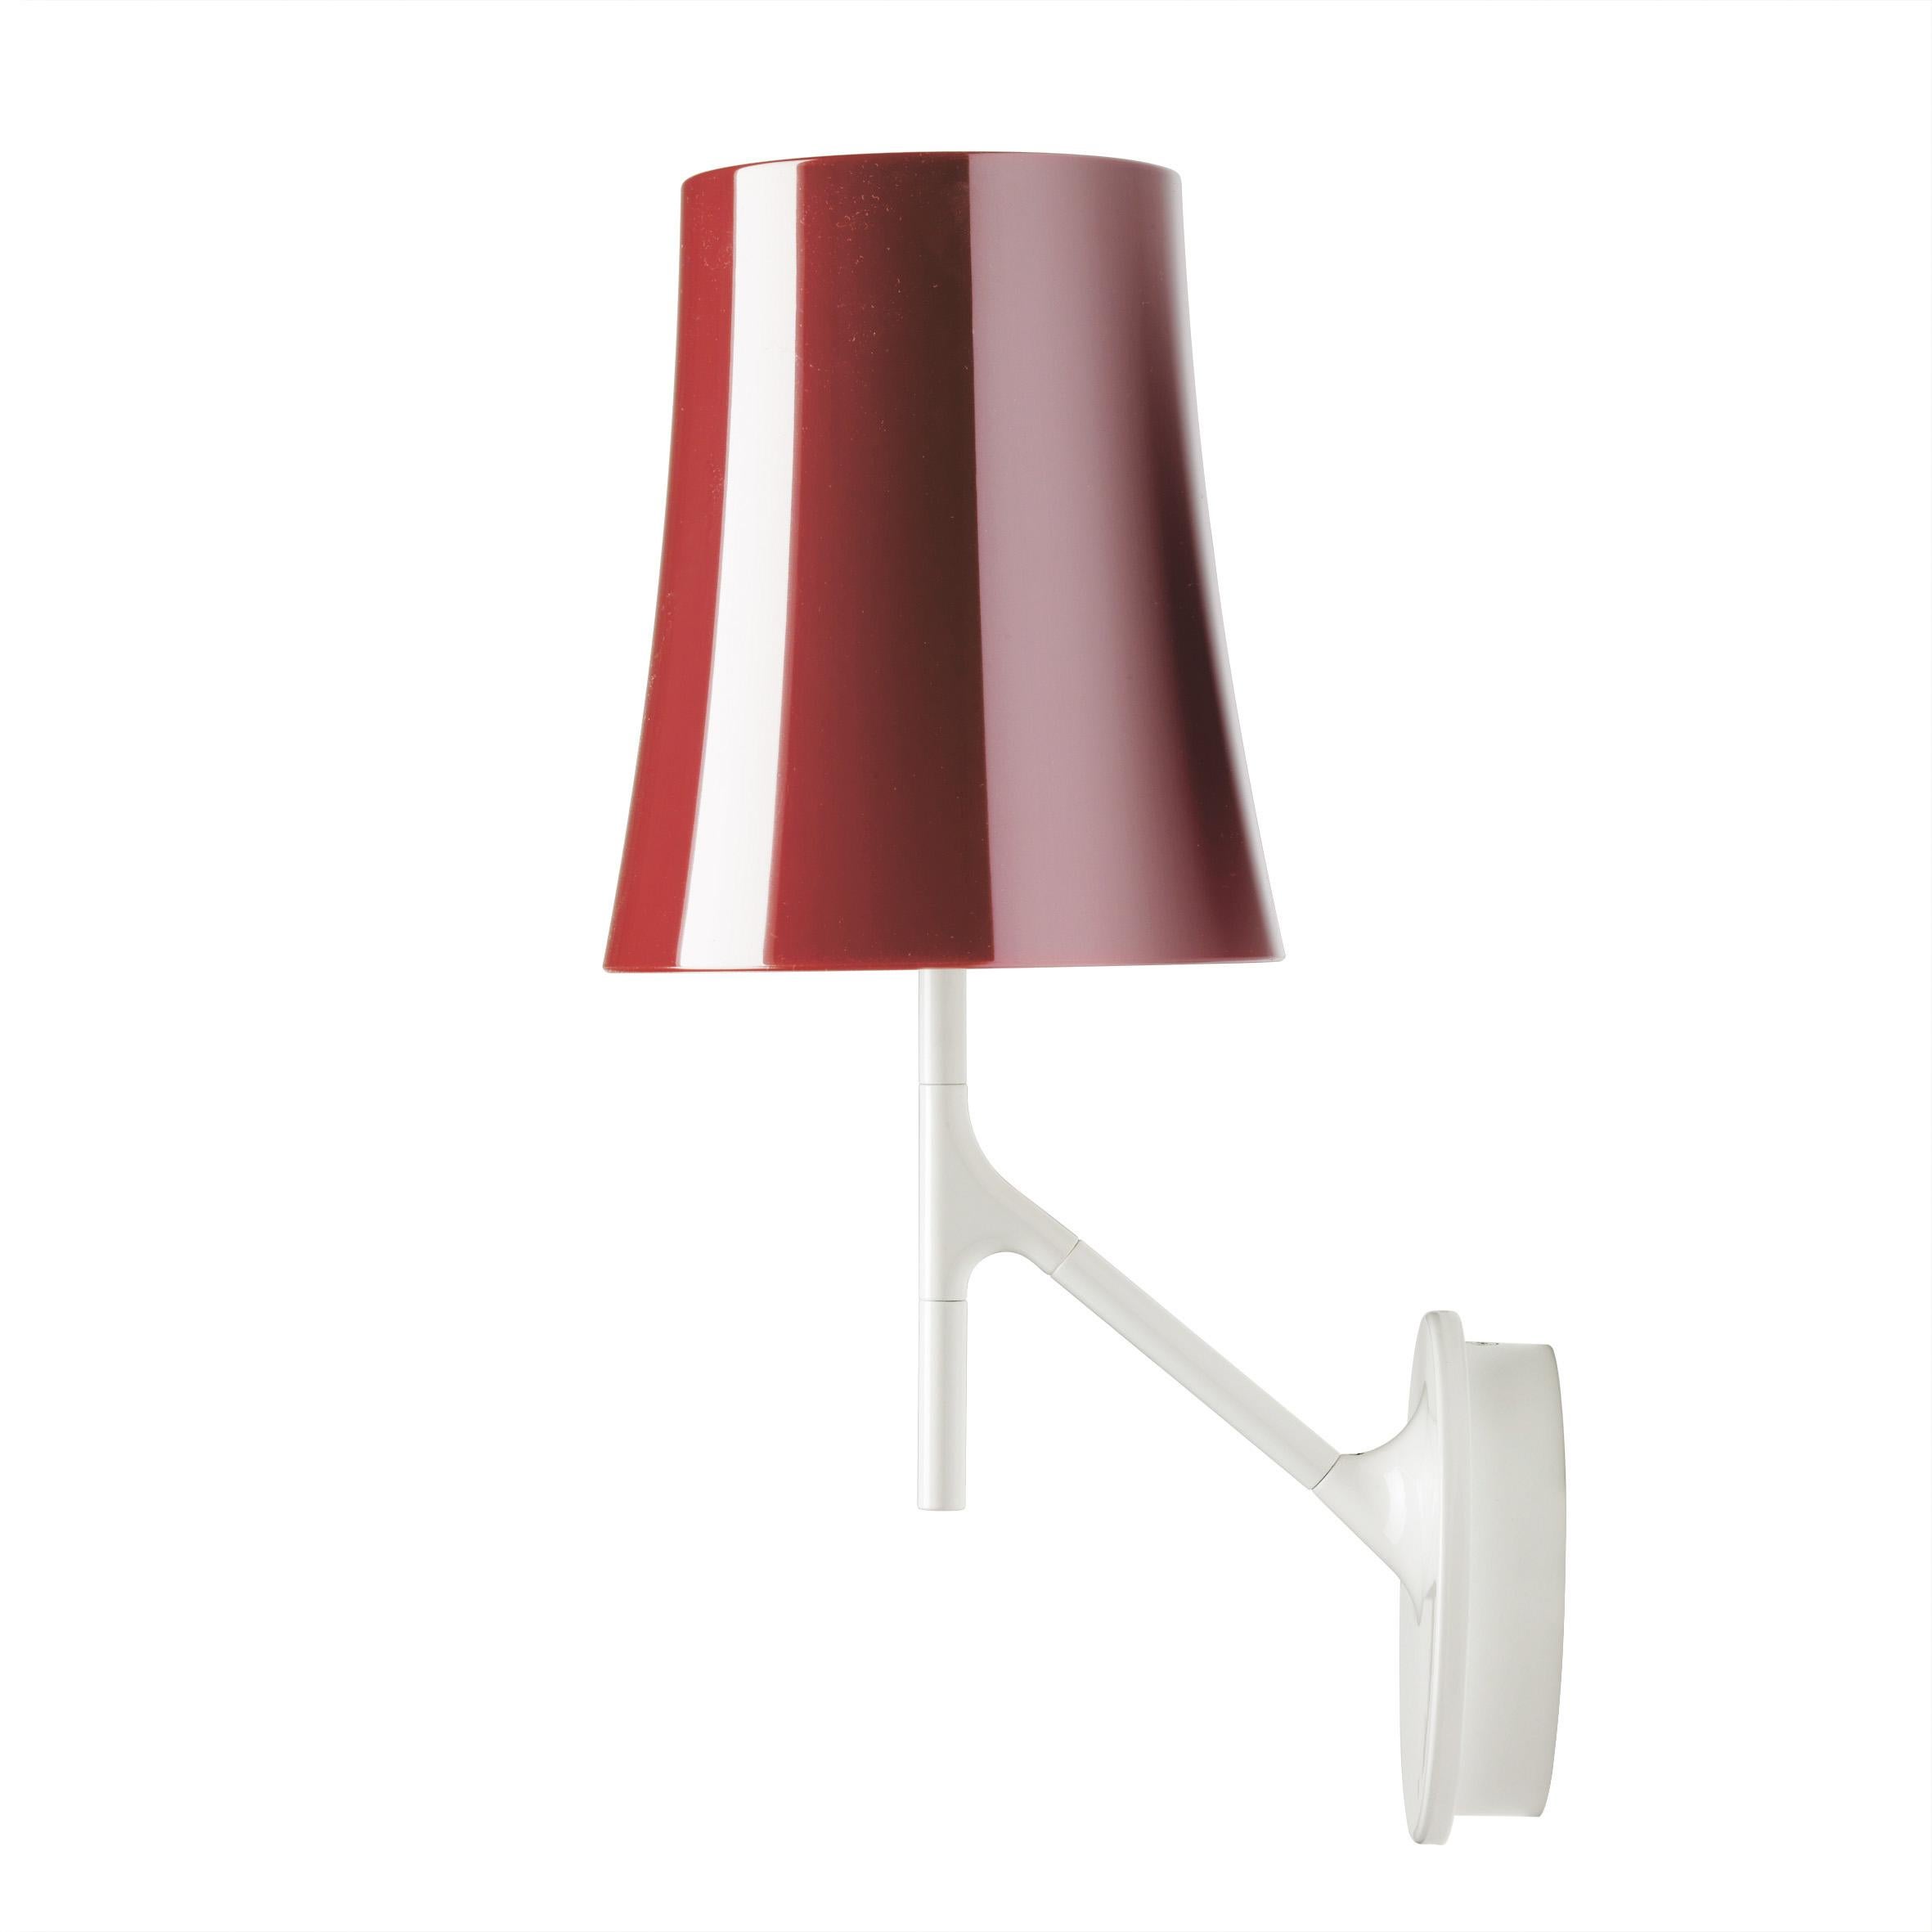 Foscarini Birdie Wall Lamp in Amaranth by Ludovica and Roberto Palomba